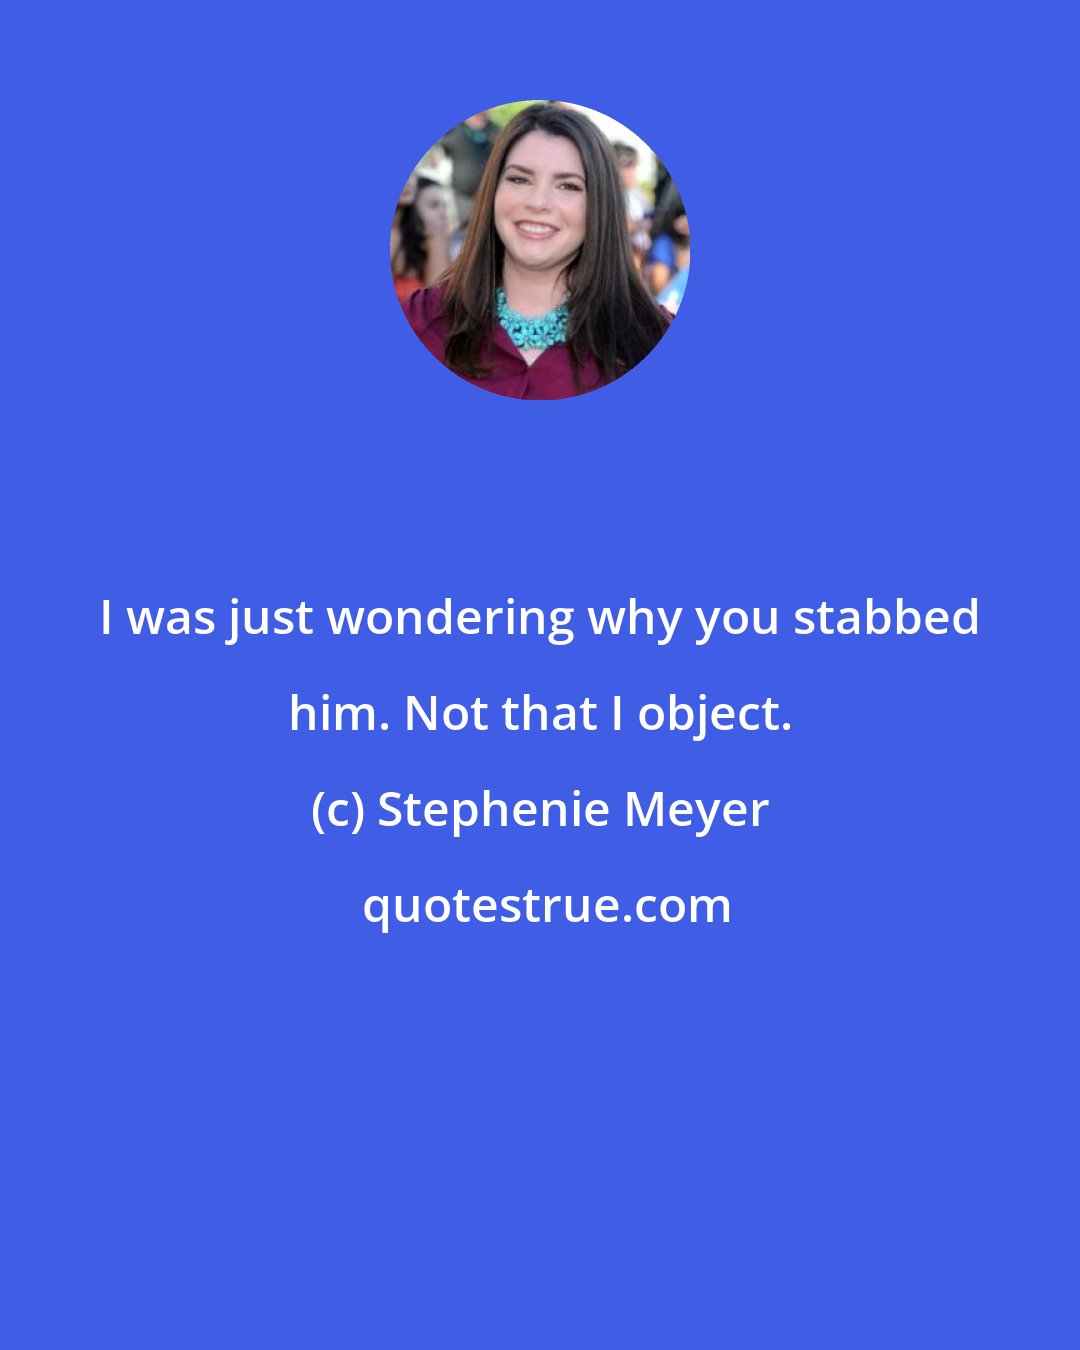 Stephenie Meyer: I was just wondering why you stabbed him. Not that I object.